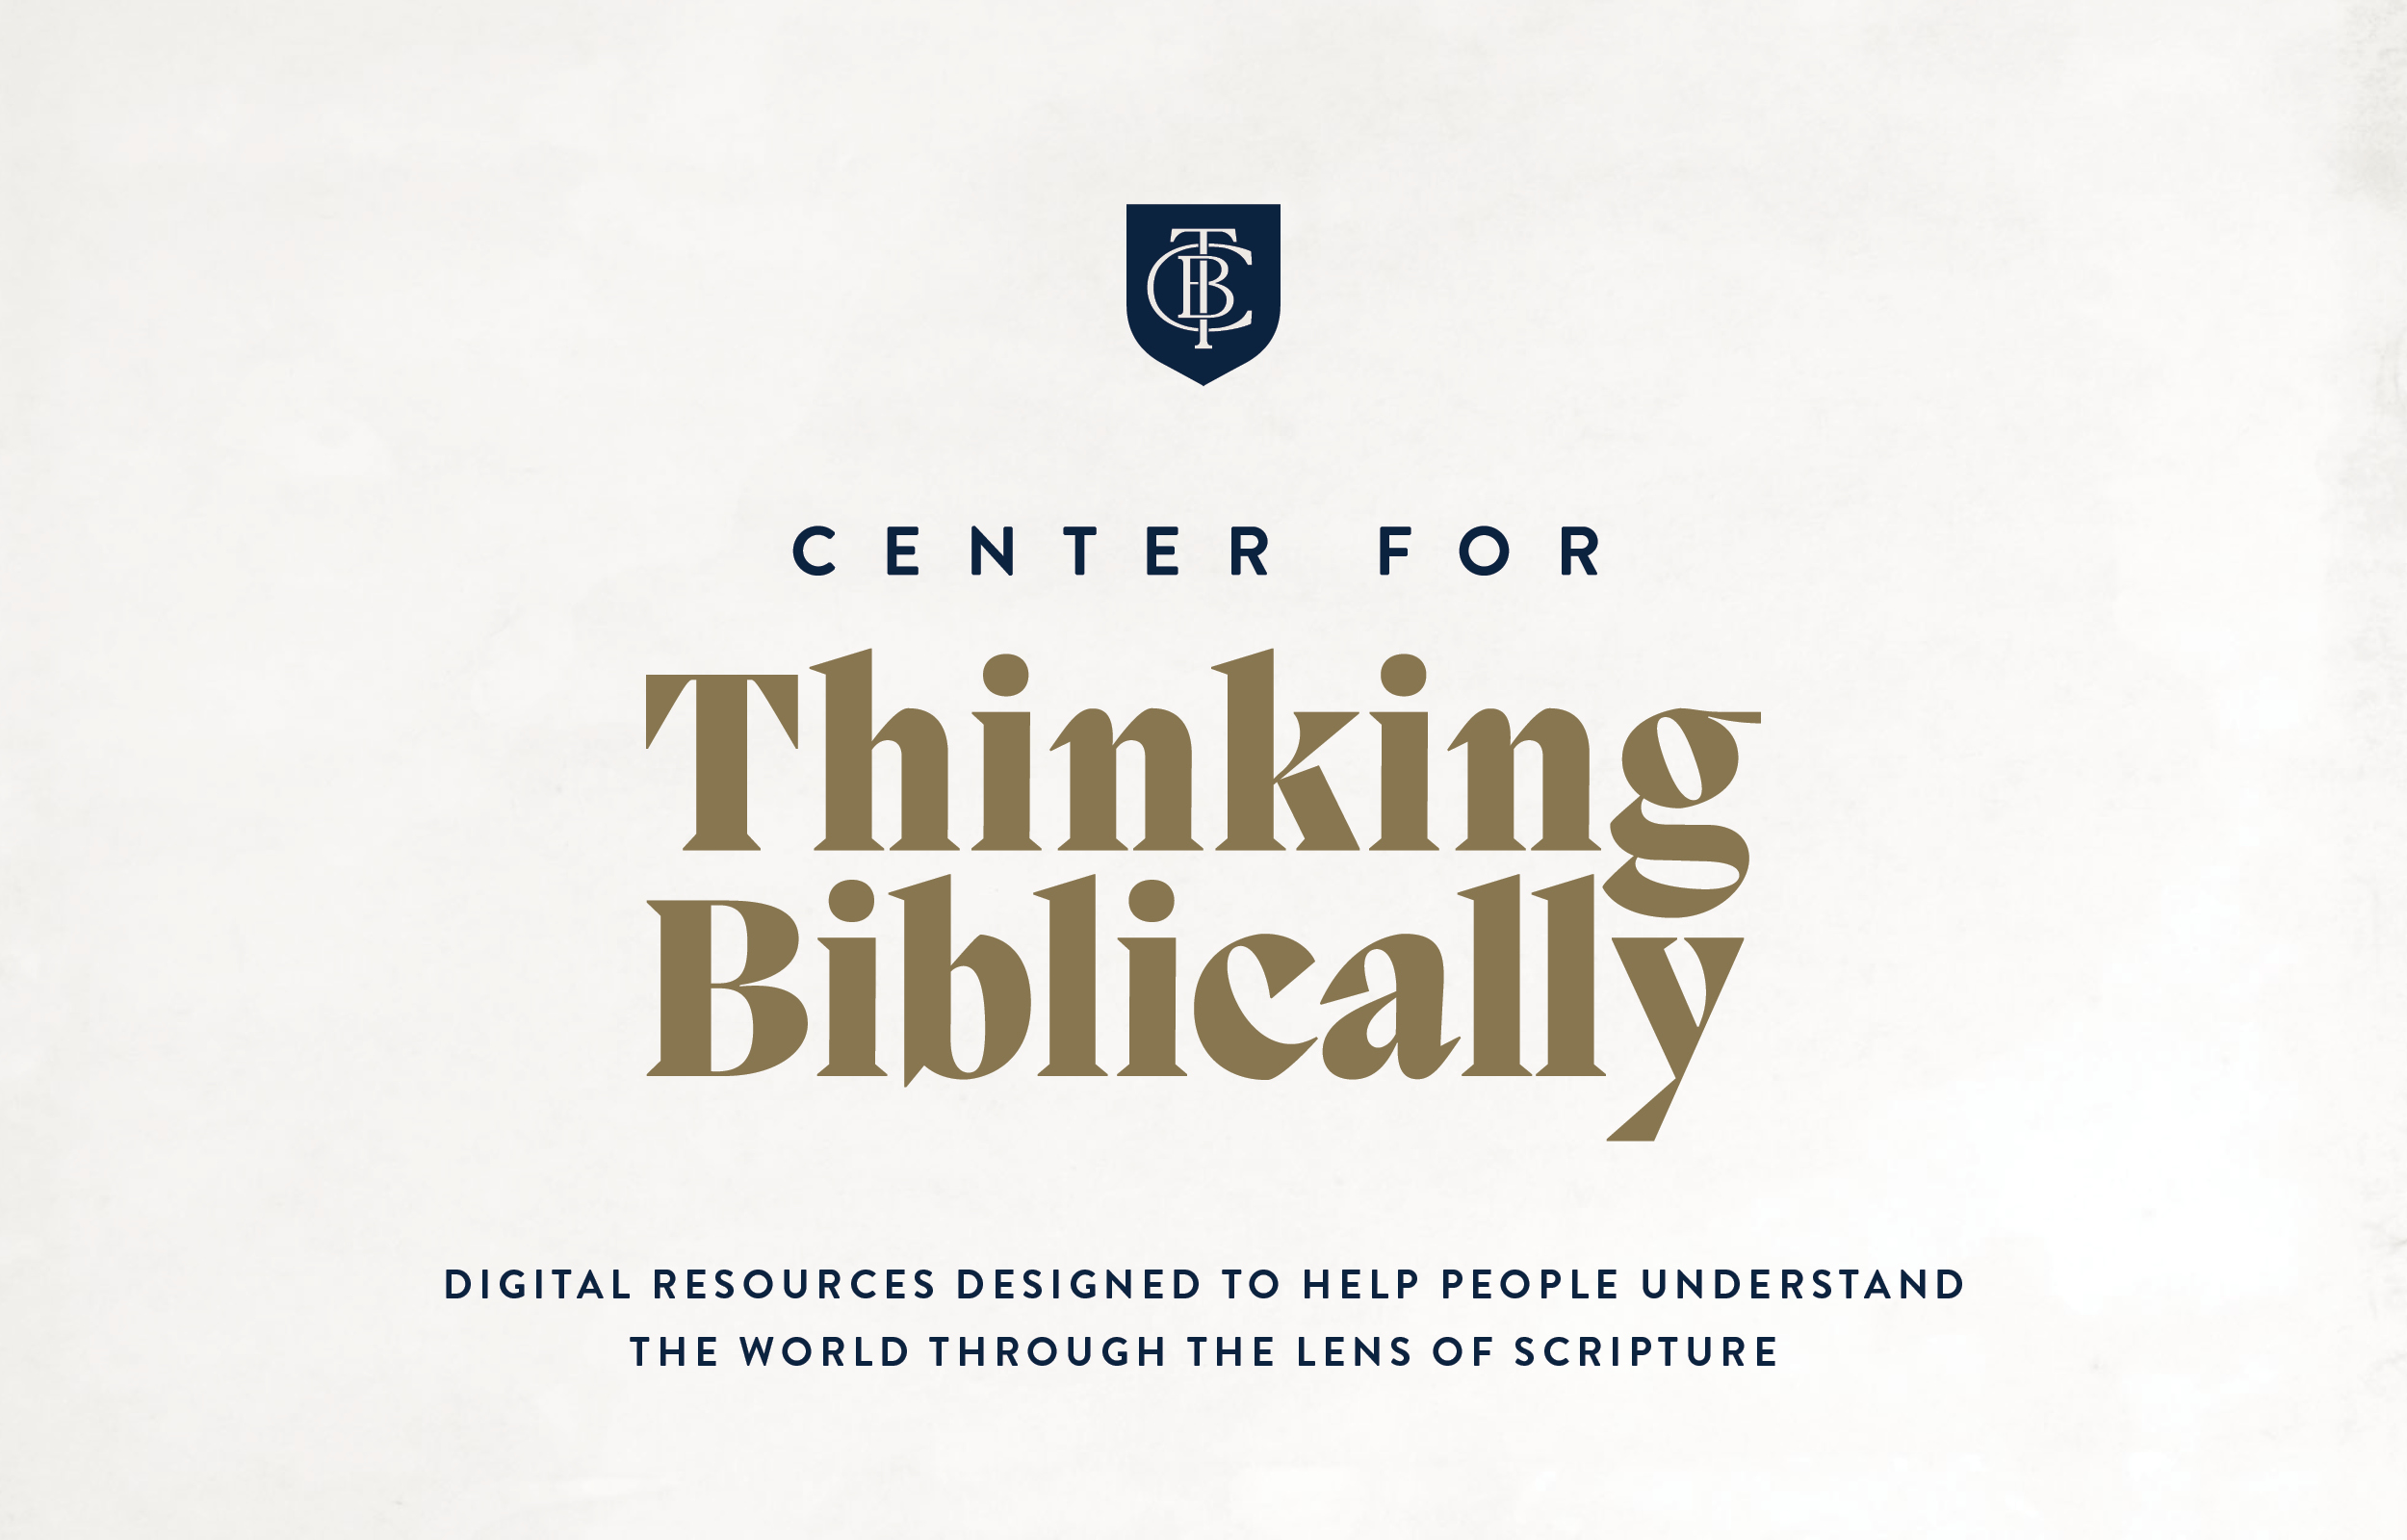 Center for Thinking Biblically